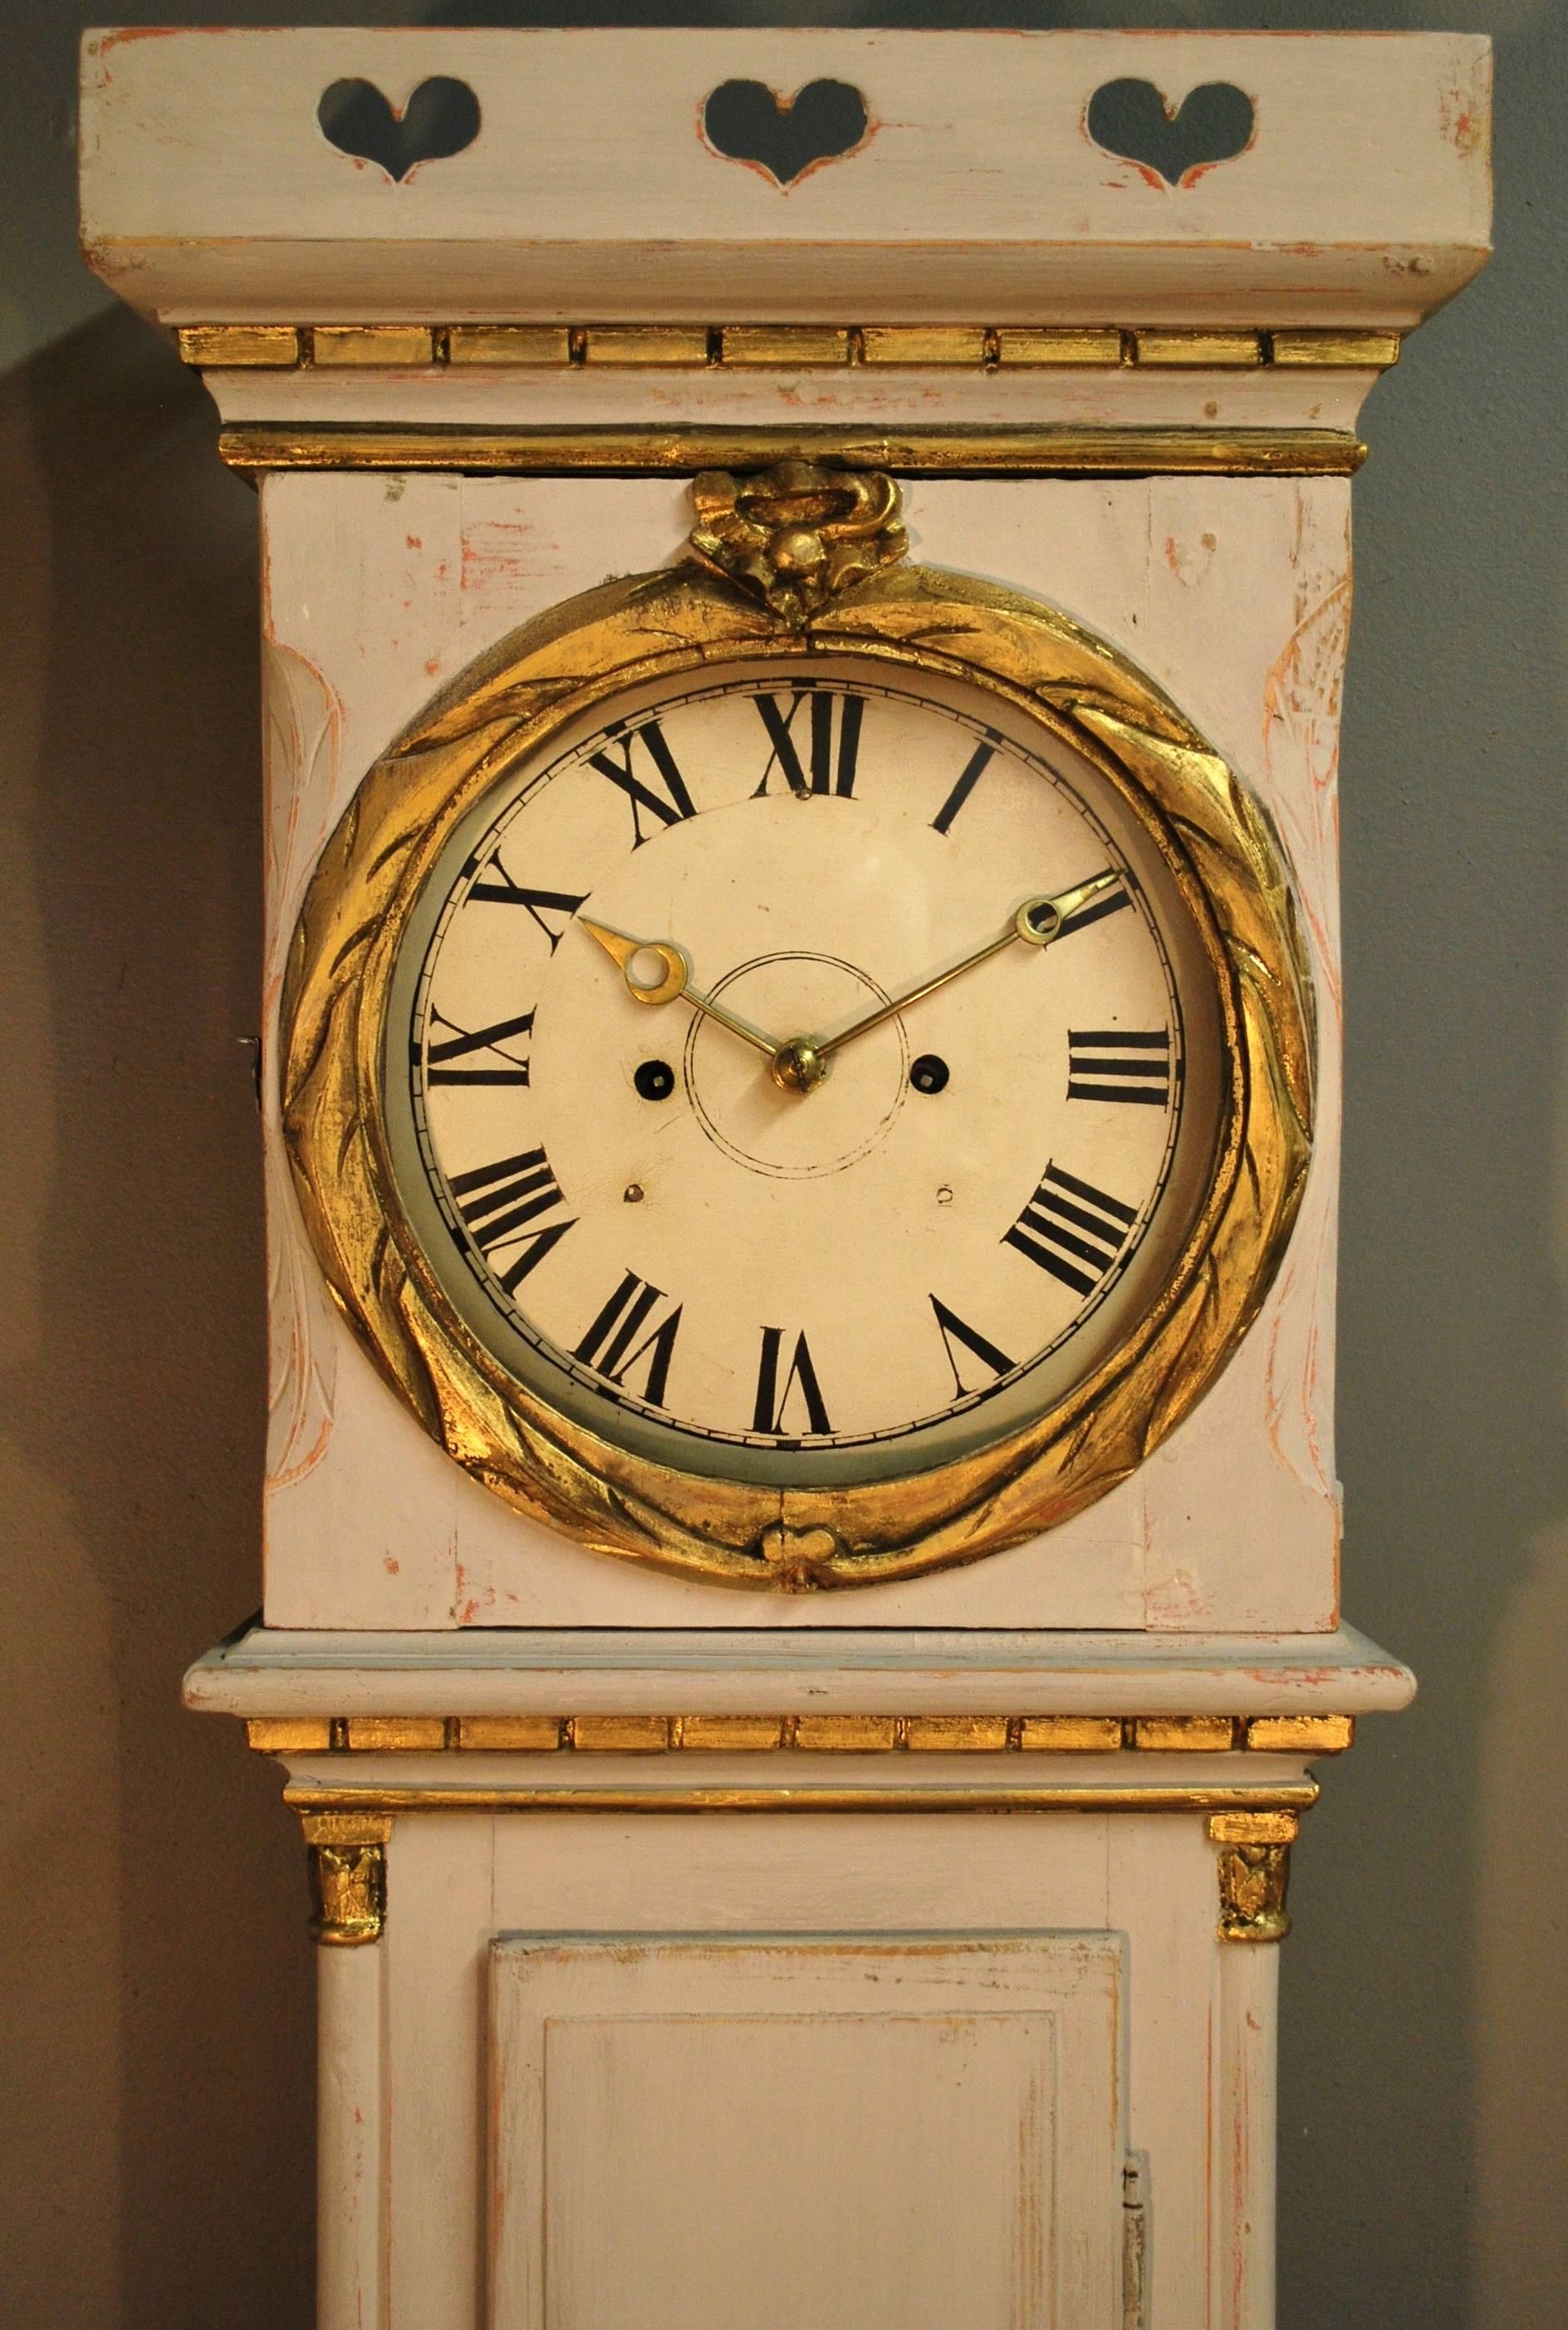 An antique Danish Bornholm tall case clock displaying a decorative crown, Classic dentil trim, a swagged detail on the base. The original brass weight driven and pendulum regulated works have been cleaned and in excellent running order, chiming on